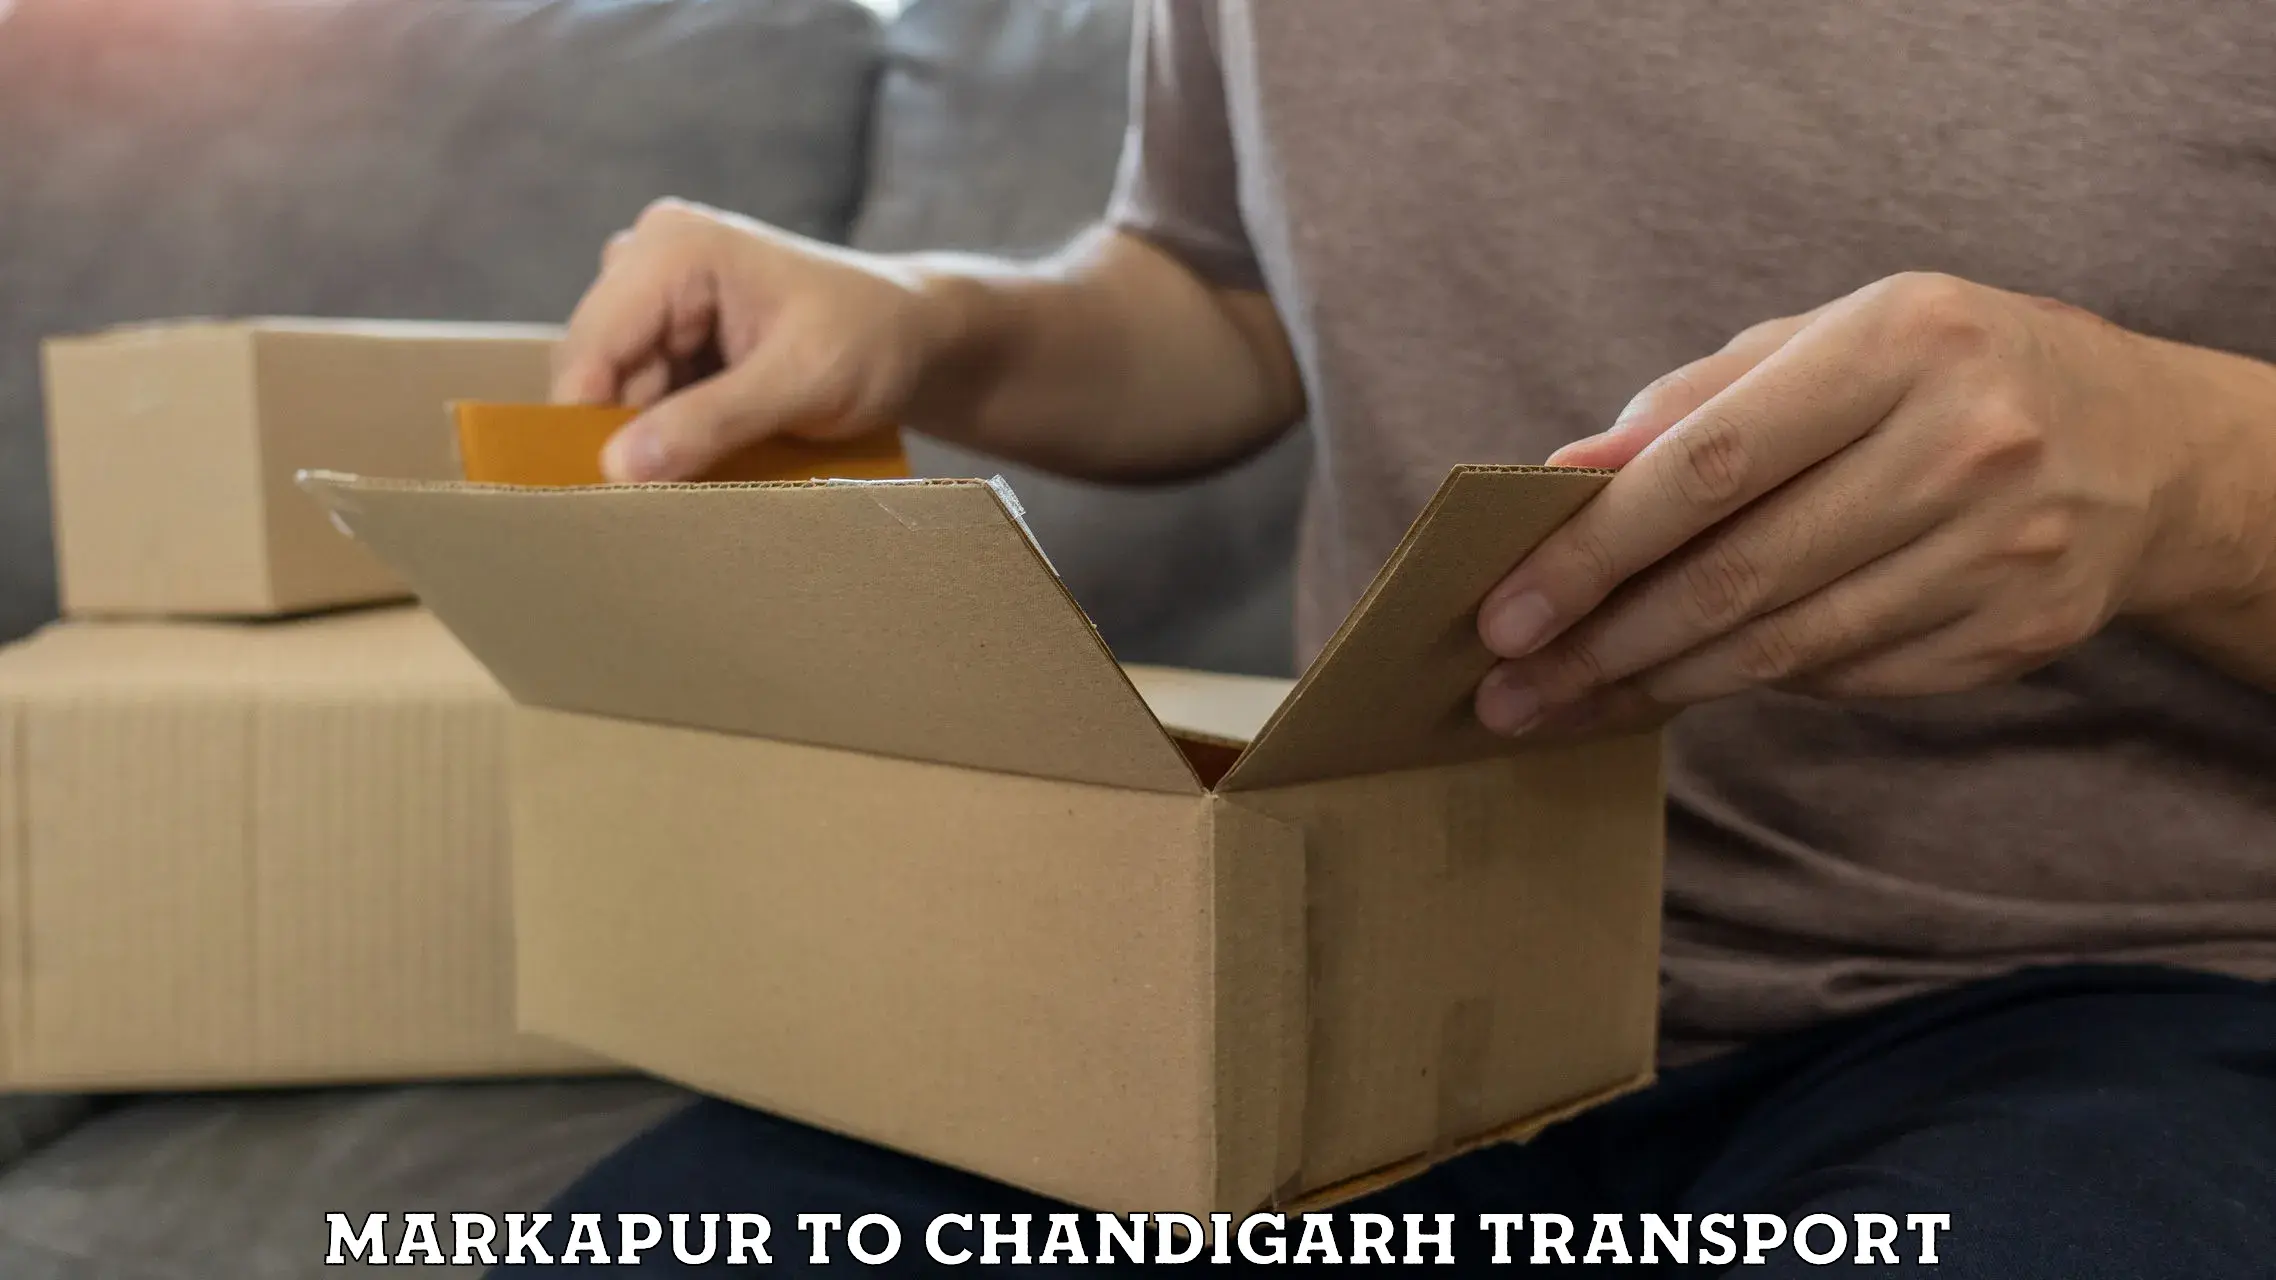 Delivery service Markapur to Chandigarh